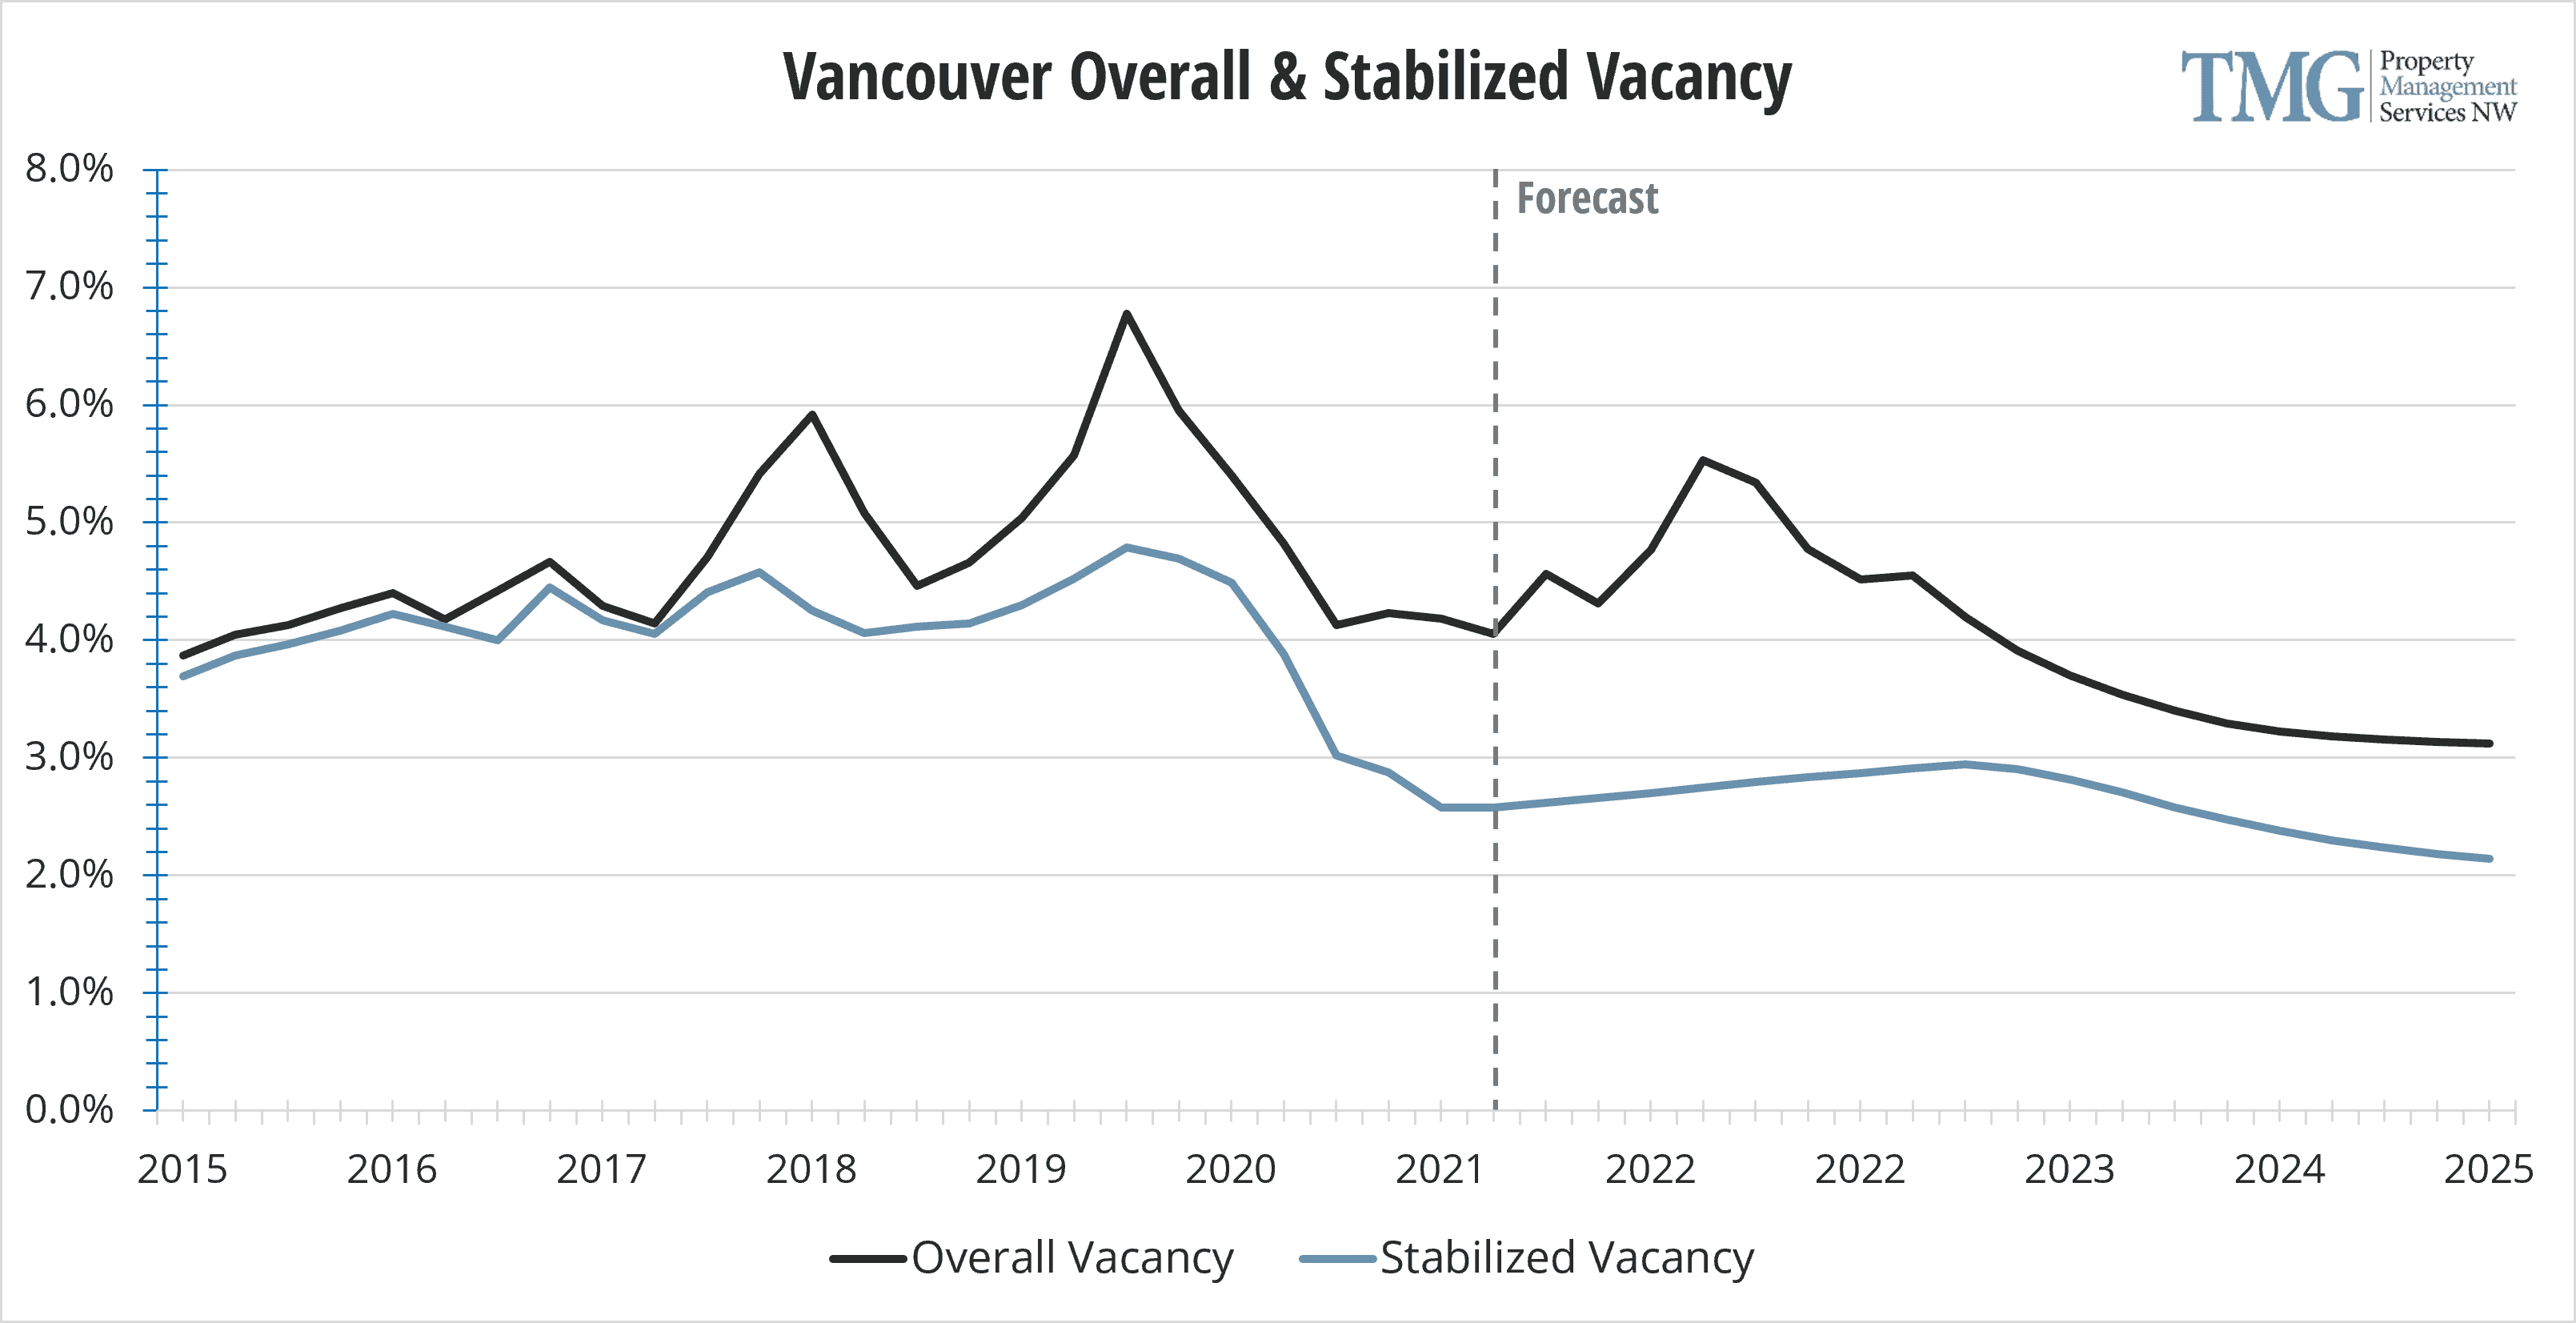 Vancouver Q1 2021 Overall & Stabilized Vacancy